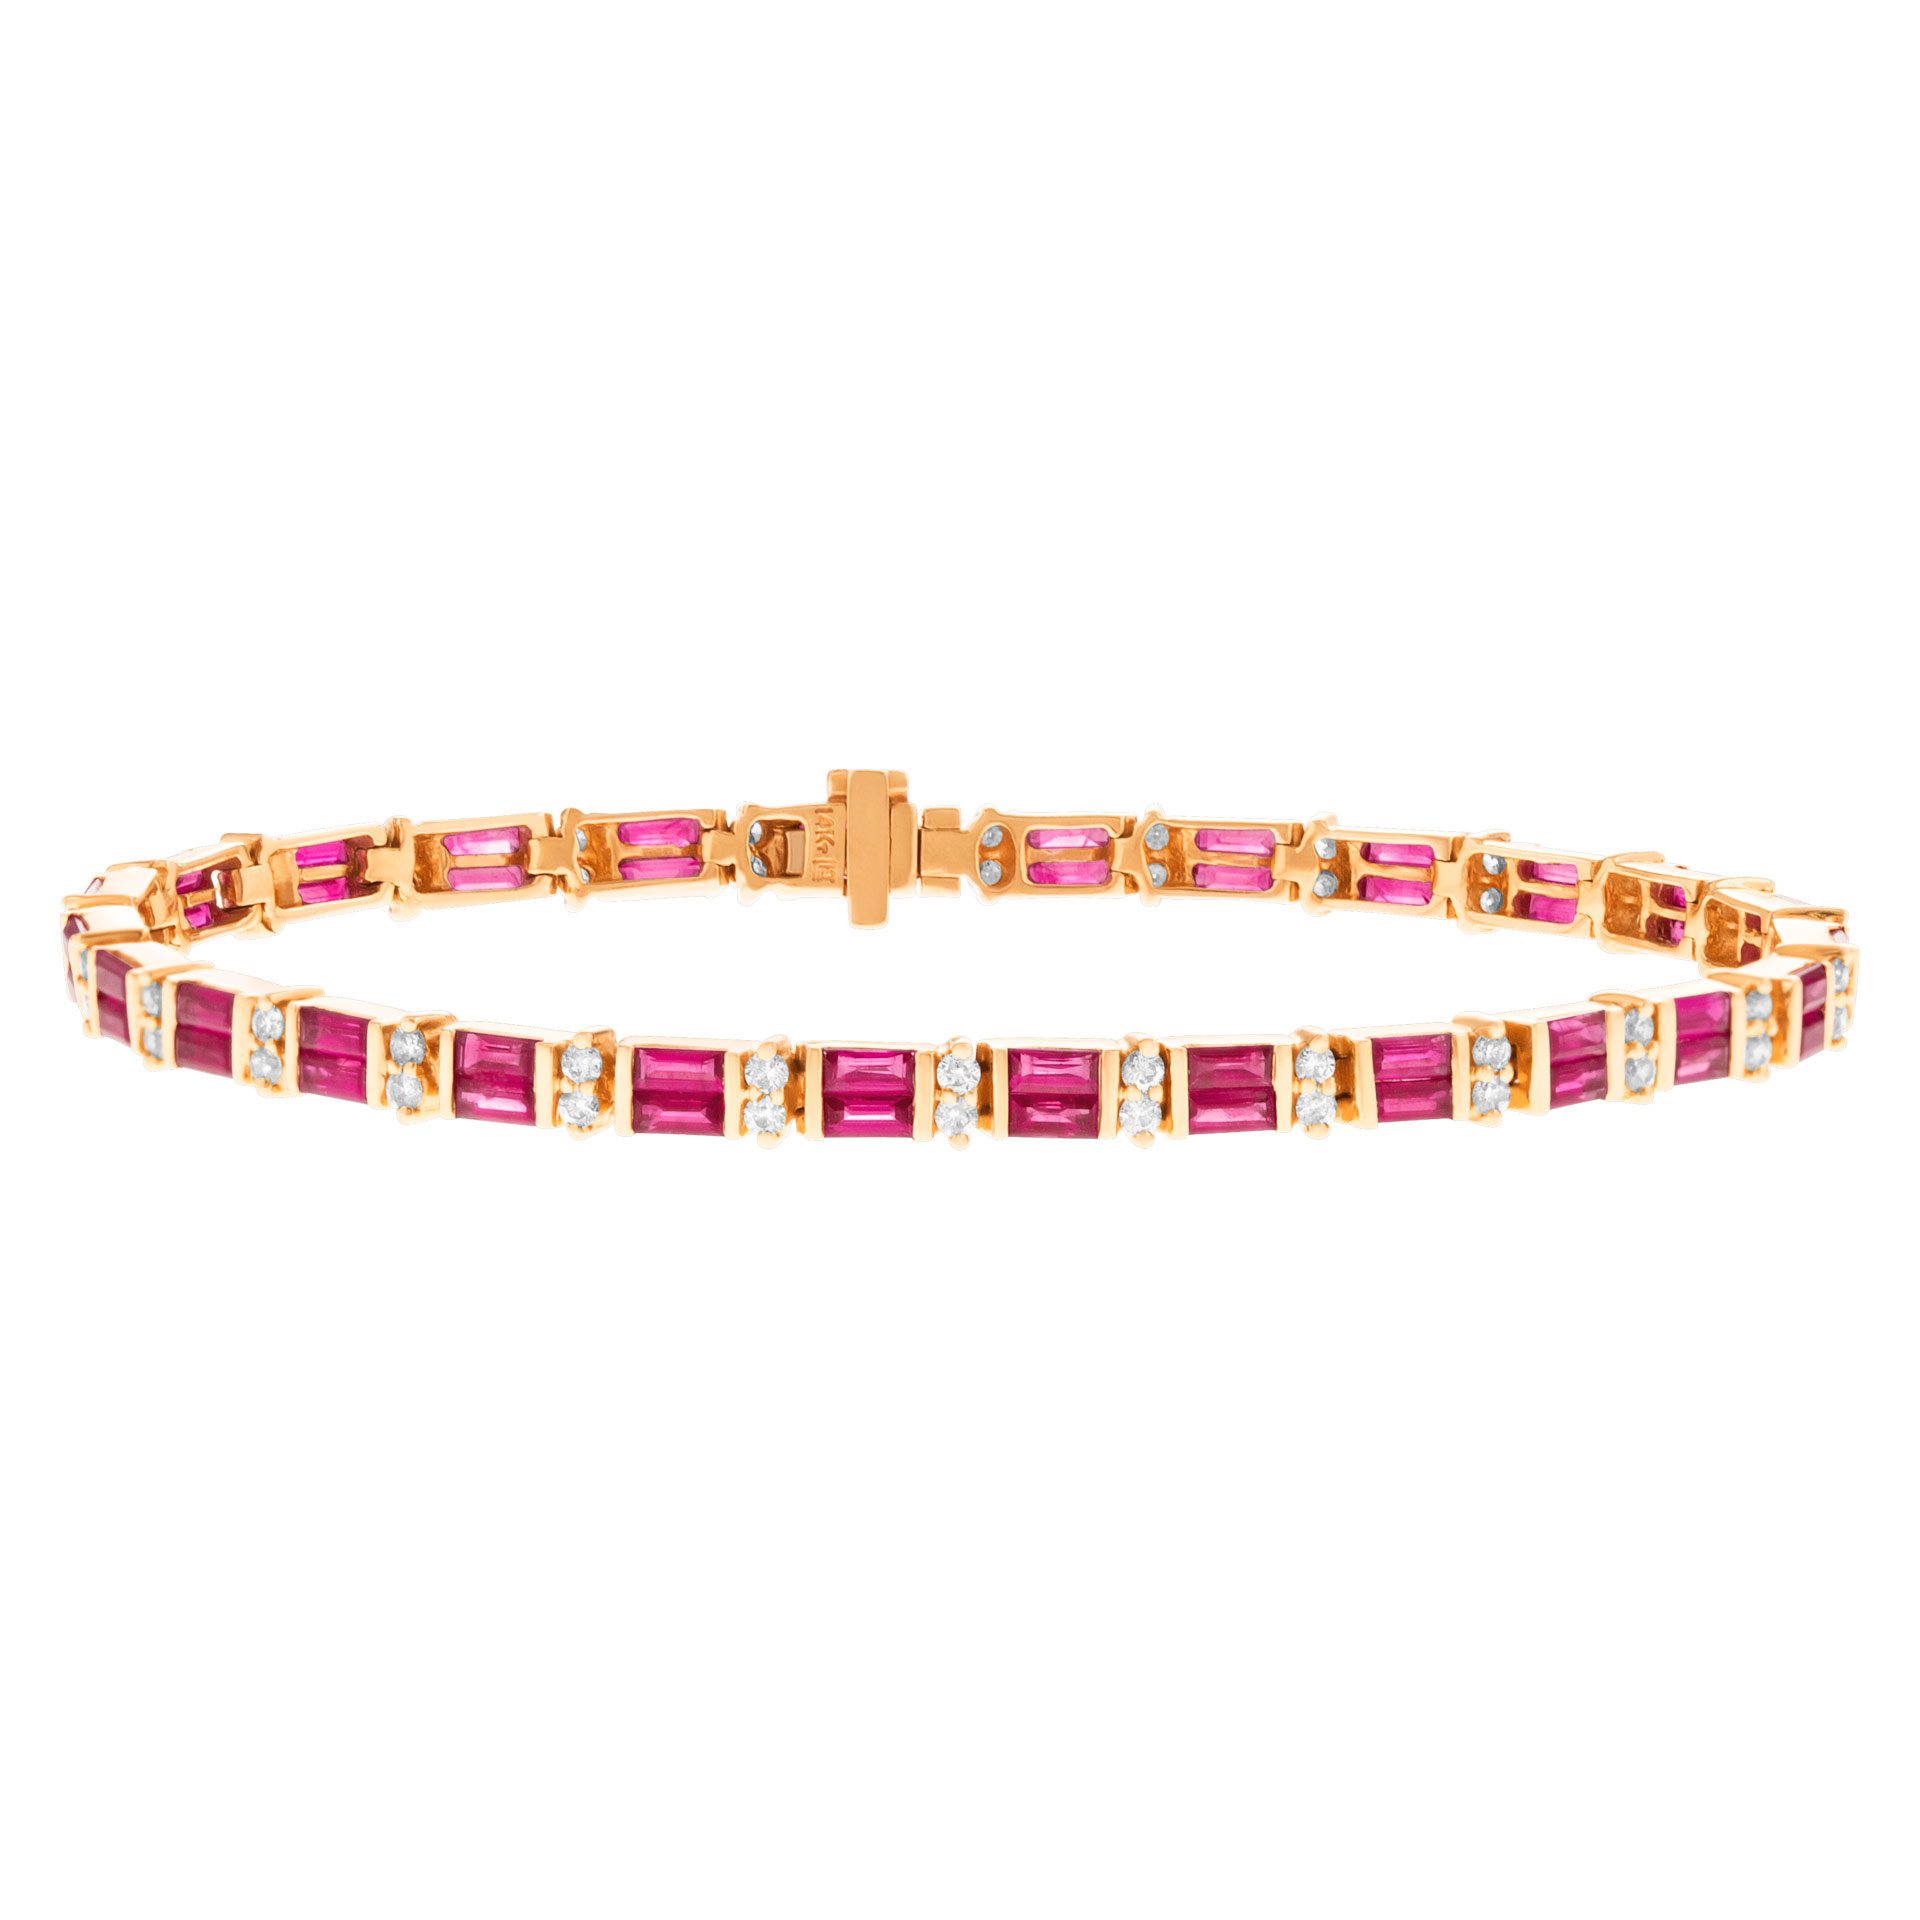 Diamond and Ruby Bracelet in 14k yellow gold